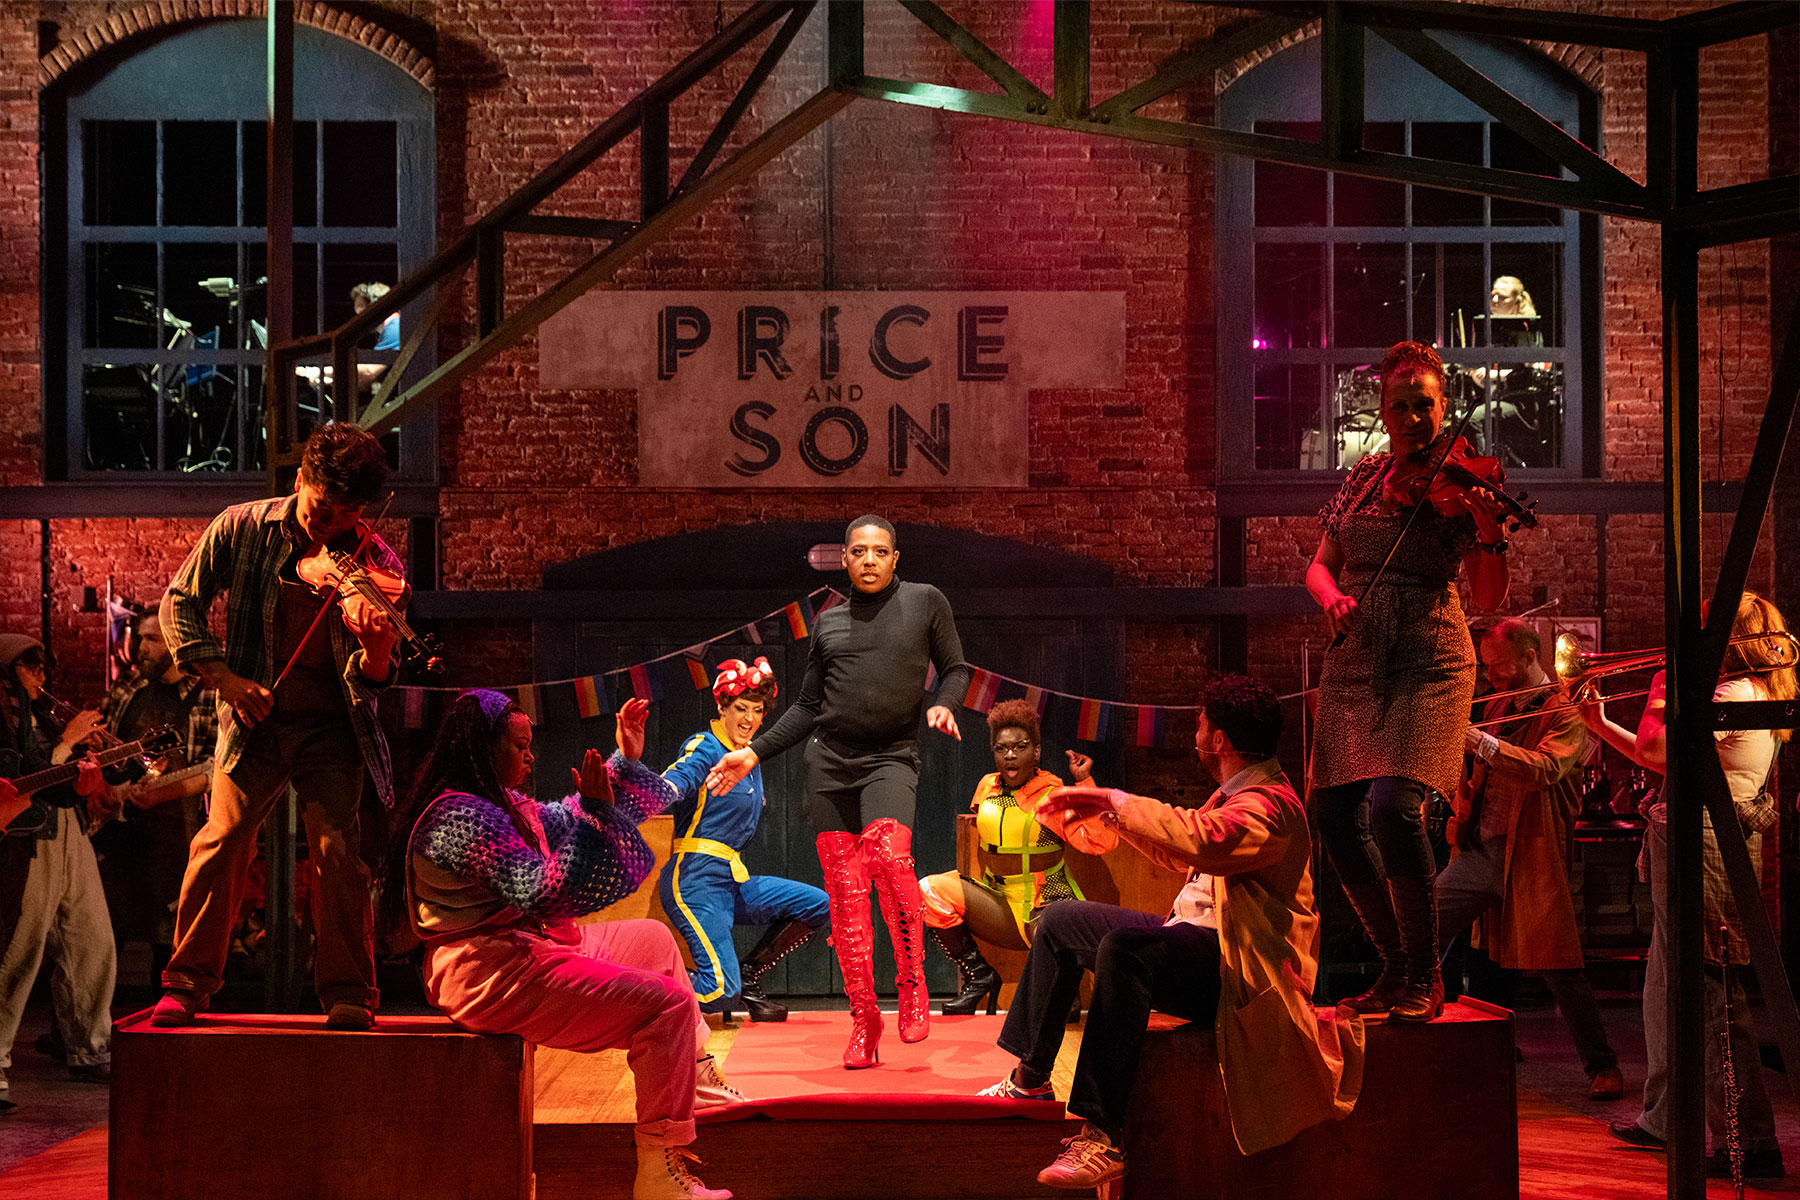 Duane-Lamonte O’Garro (as Lola) and the cast of Kinky Boots at Storyhouse Chester